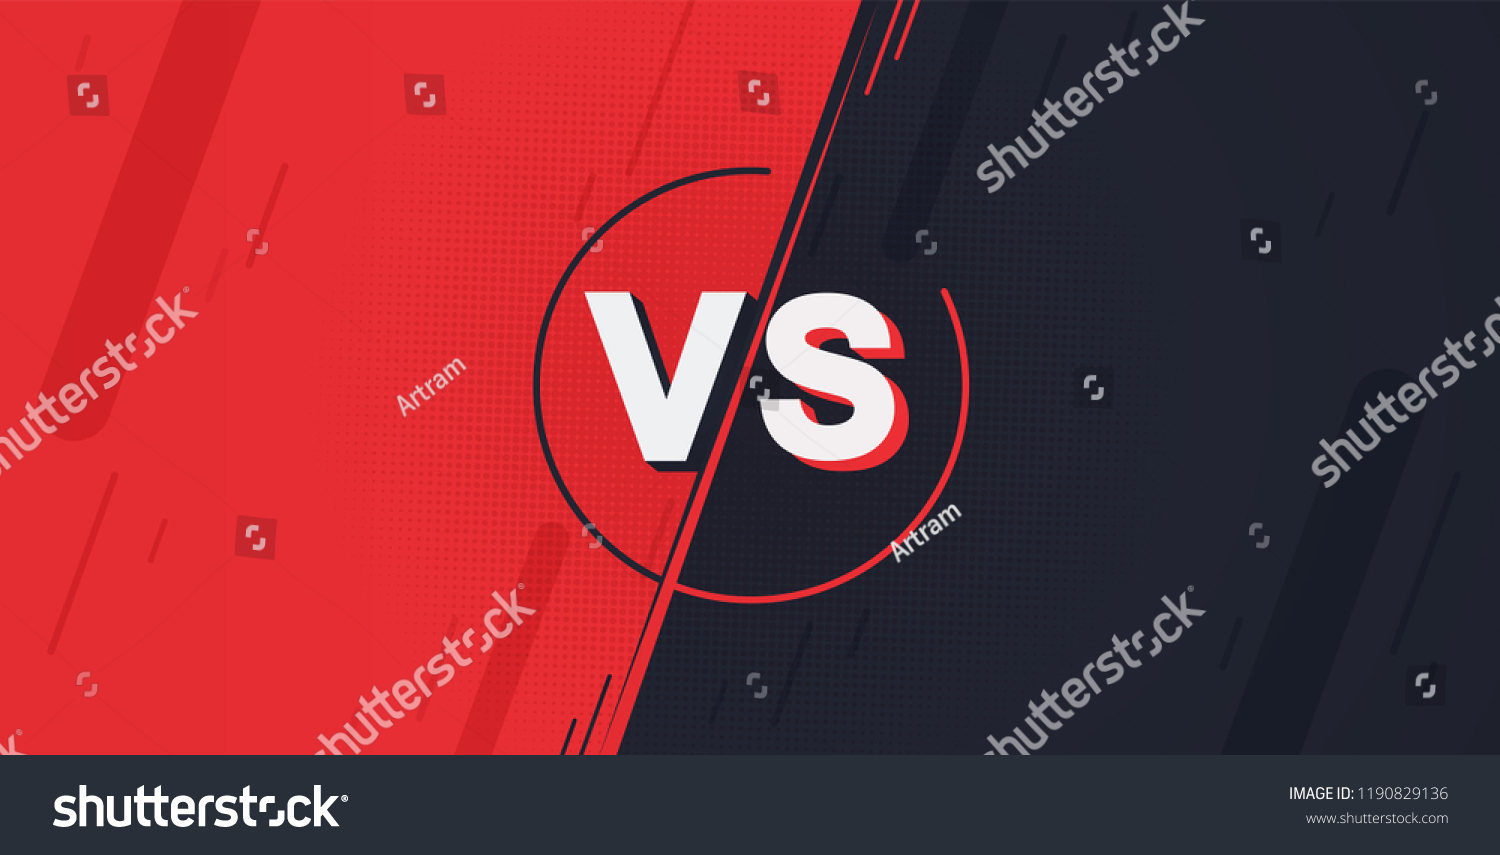 SVG of Versus screen. Fight backgrounds against each other, red vs dark blue. svg